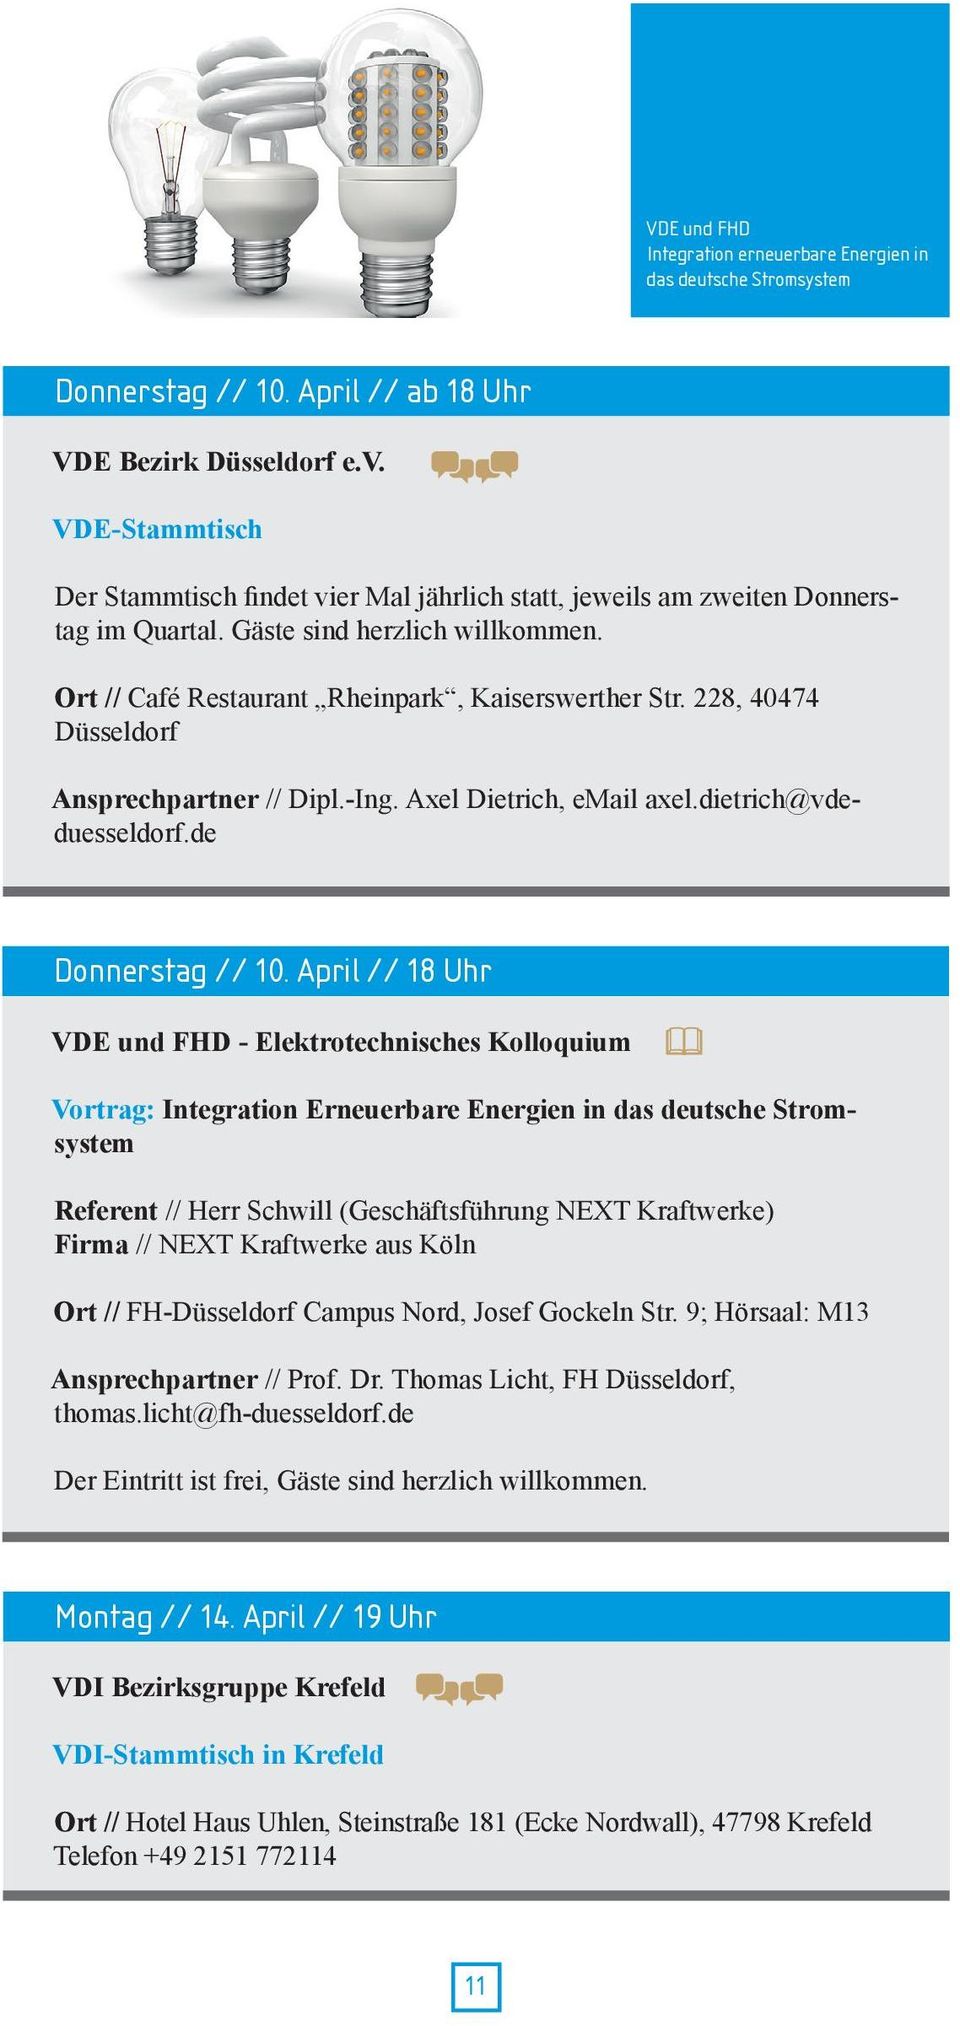 228, 40474 Ansprechpartner // Dipl.-Ing. Axel Dietrich, email axel.dietrich@vdeduesseldorf.de Donnerstag // 10.